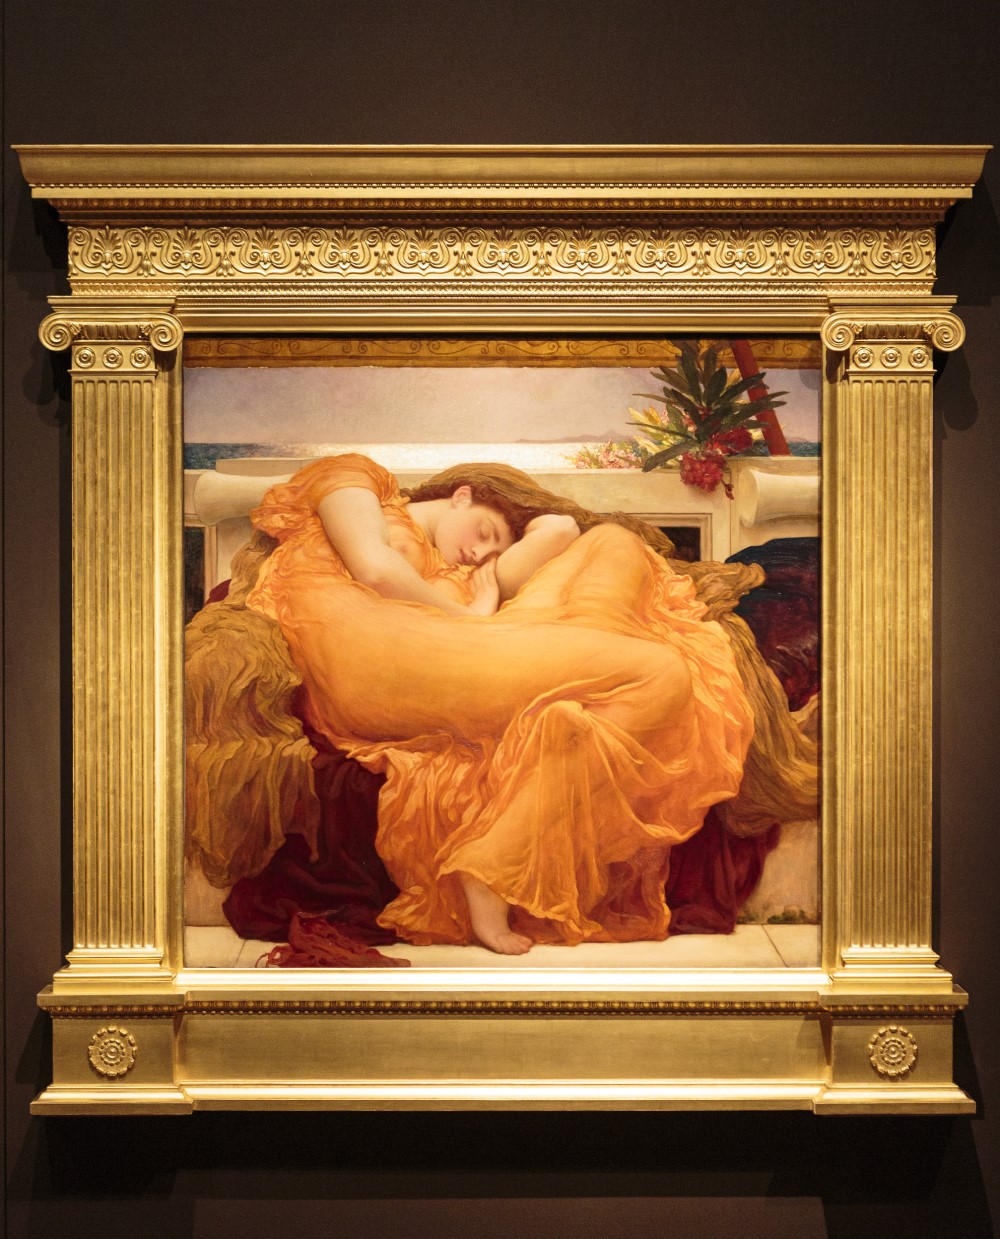 Flaming June, by Frederic Leighton (c1895)Â©Leighton House Museum, Photo by Kevin Moran